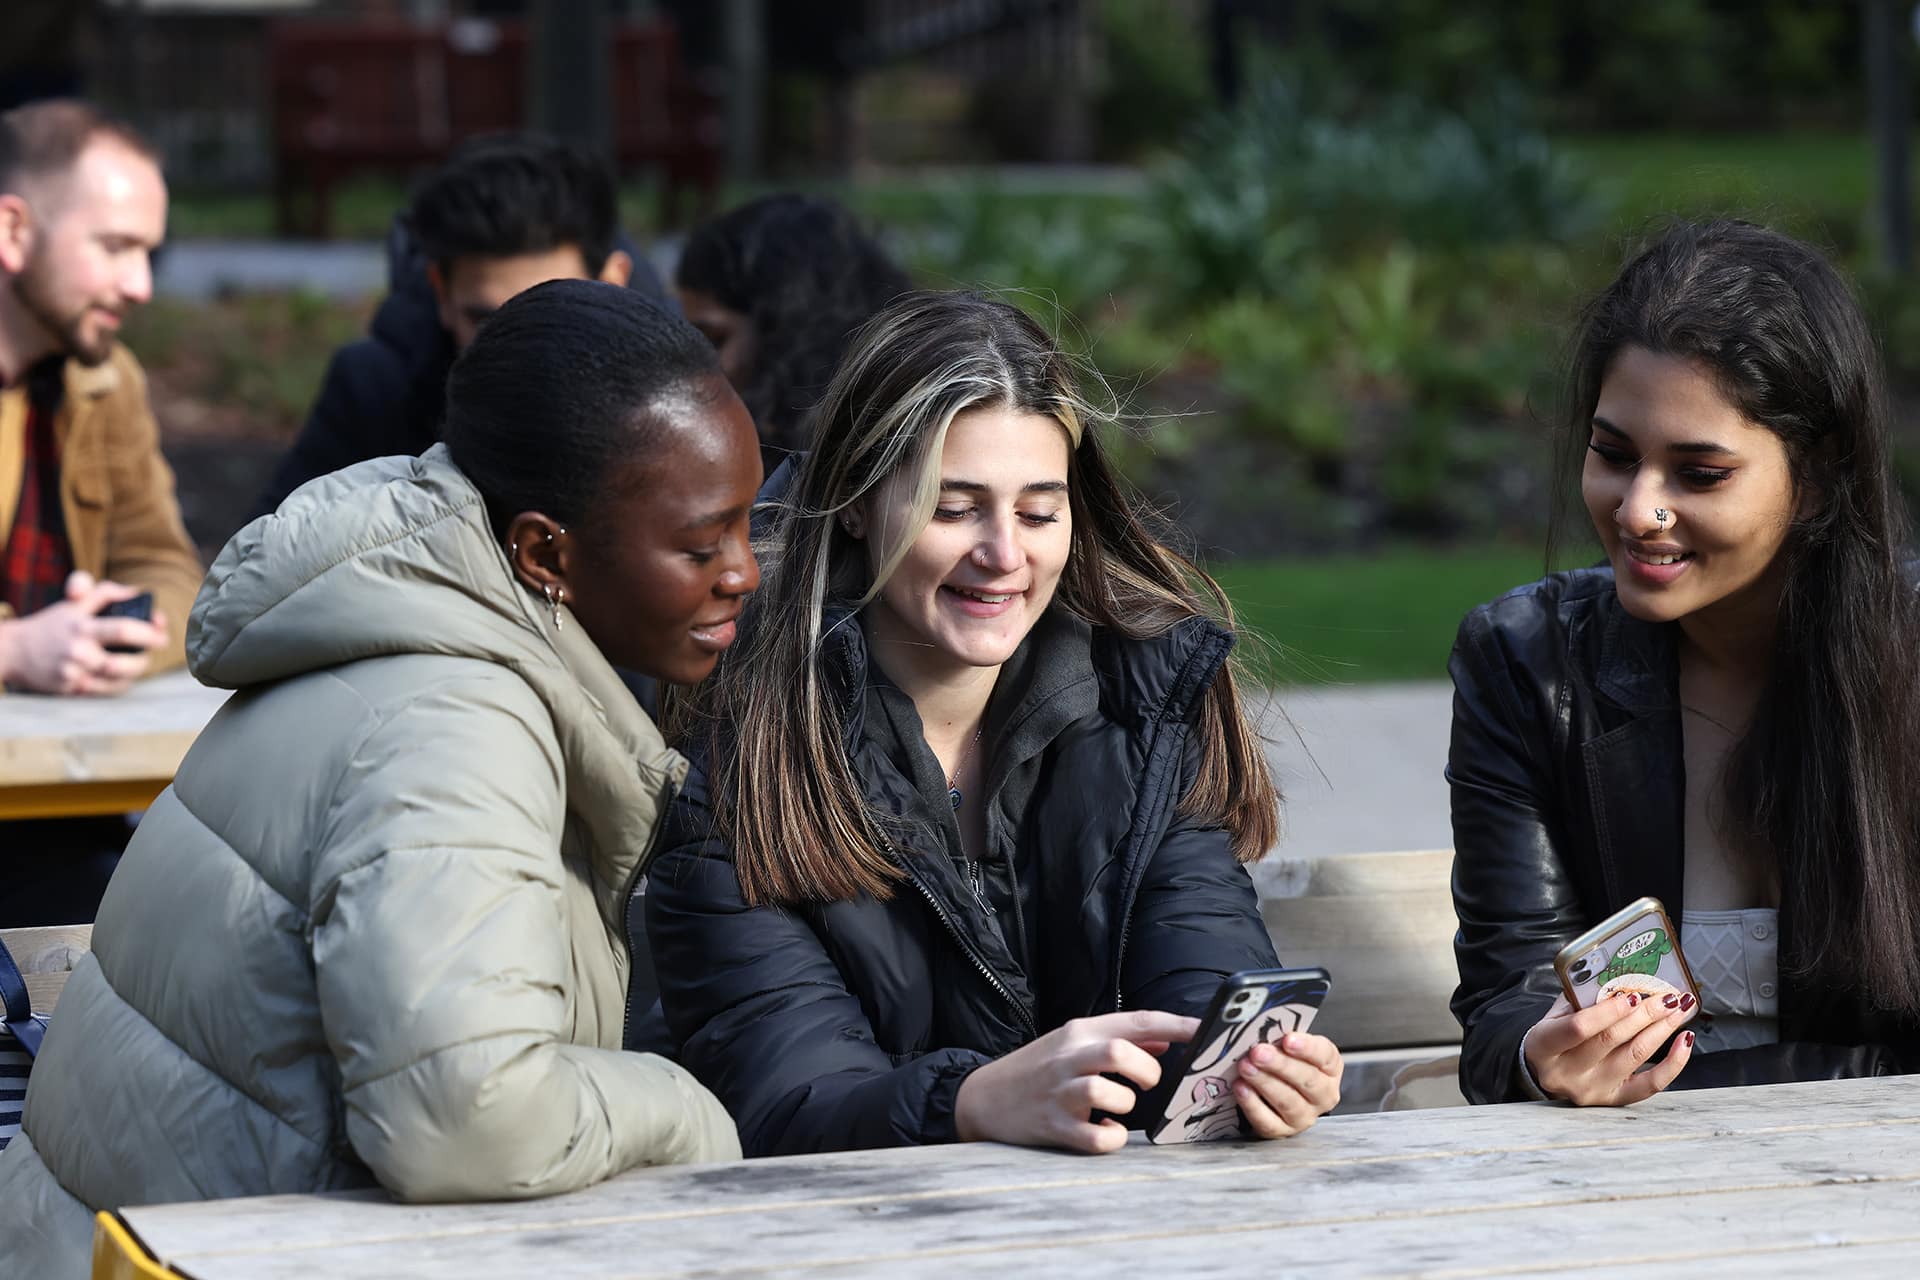 Three female students sit at an outside table on campus. They are smiling and looking at a phone together.